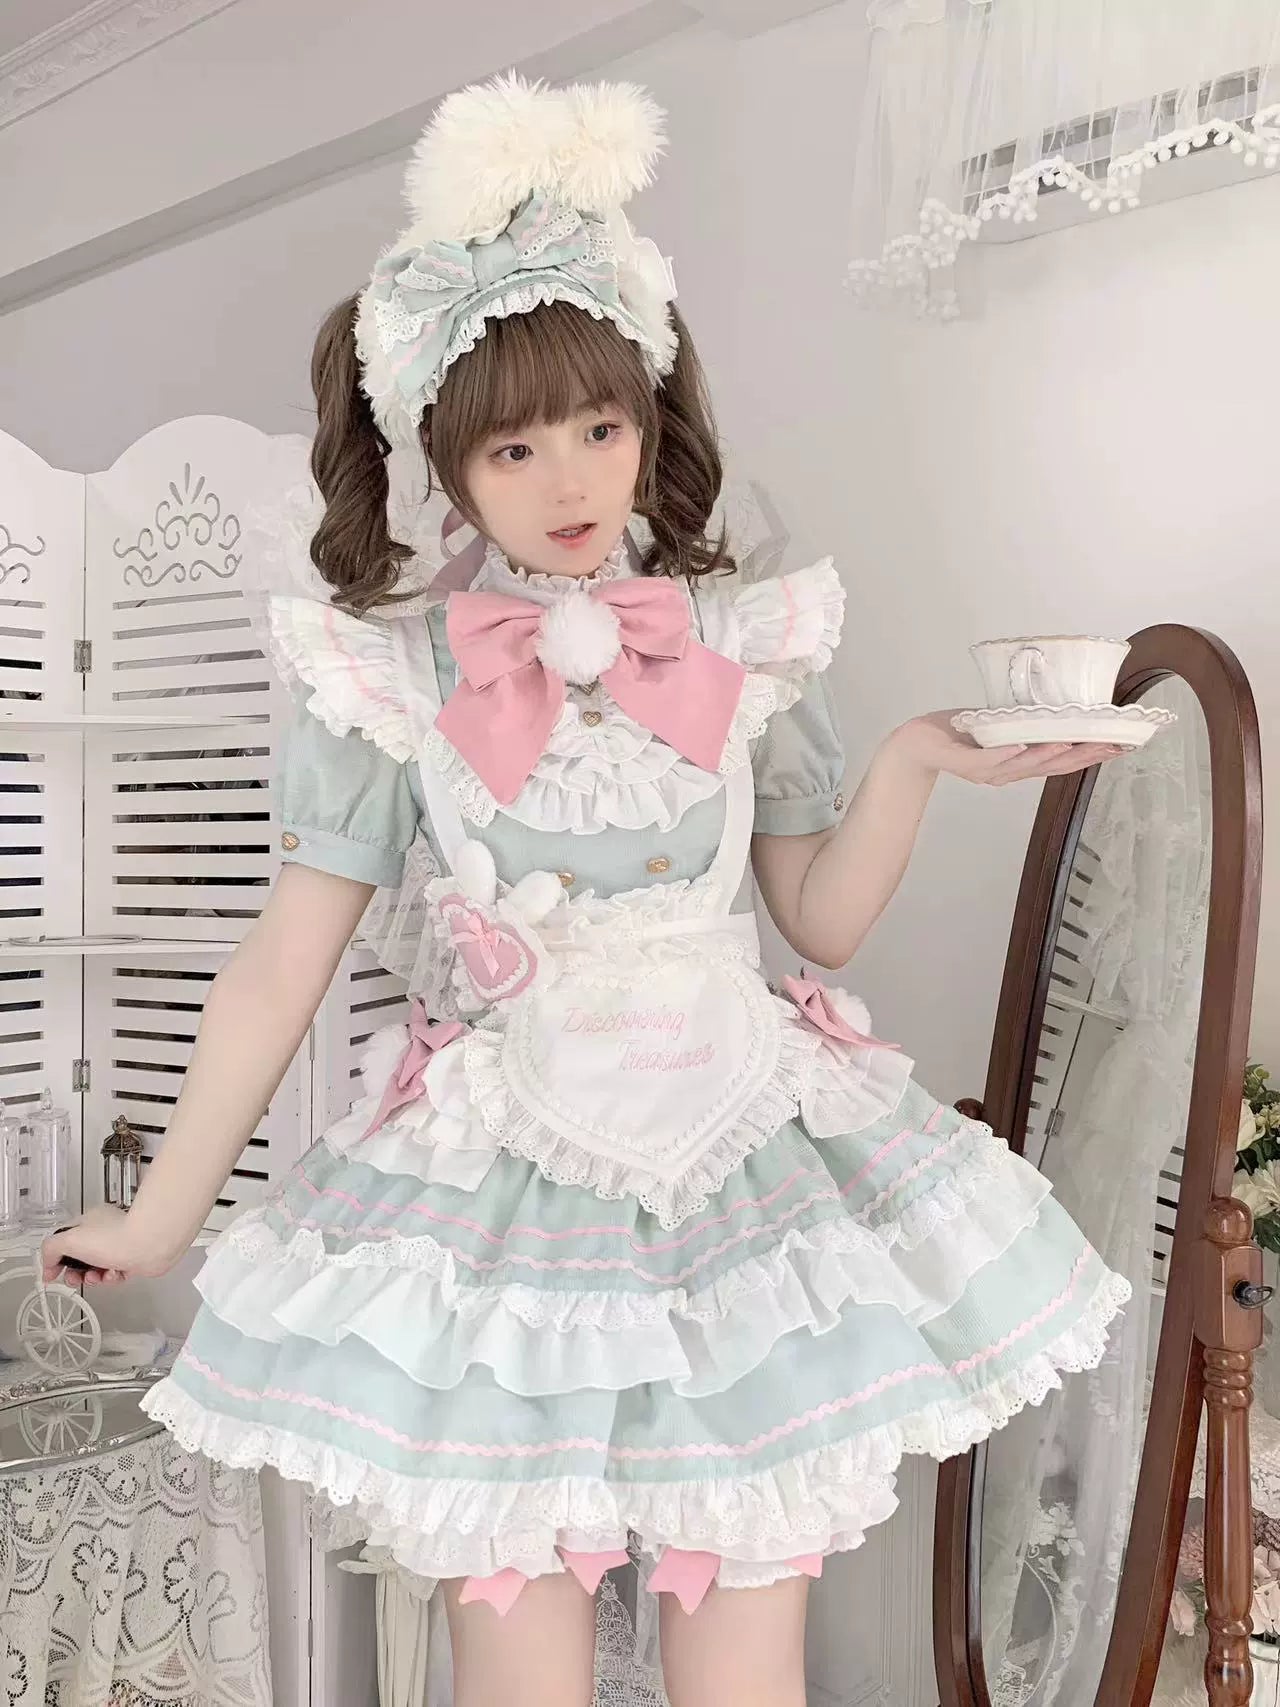 Only available for simultaneous purchase [Sales period ended] Fairydoll Maid accessories